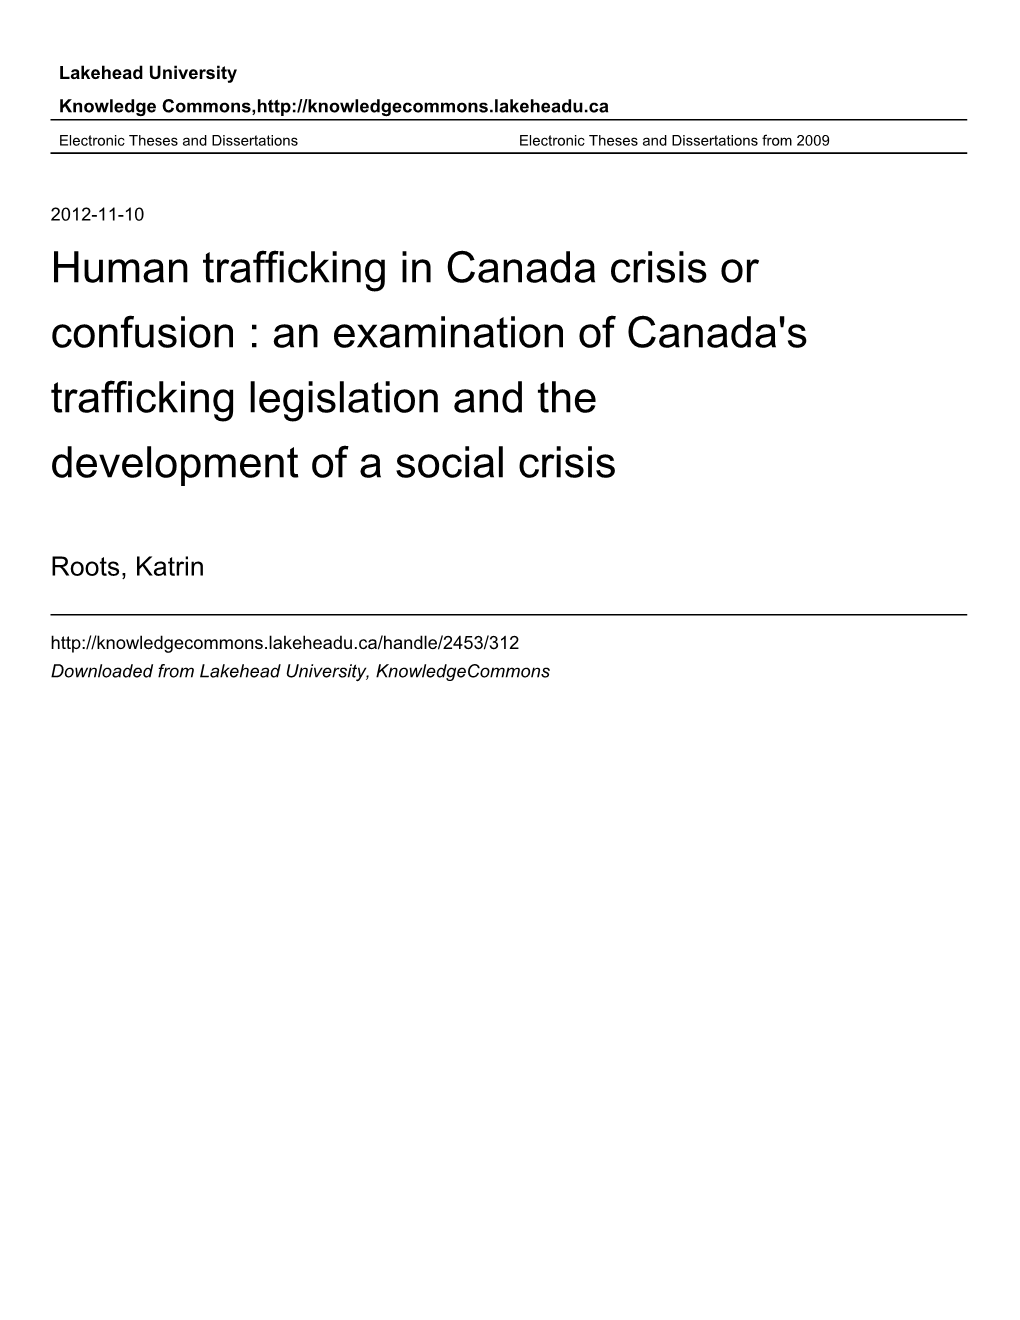 Human Trafficking in Canada Crisis Or Confusion : an Examination of Canada's Trafficking Legislation and the Development of a Social Crisis